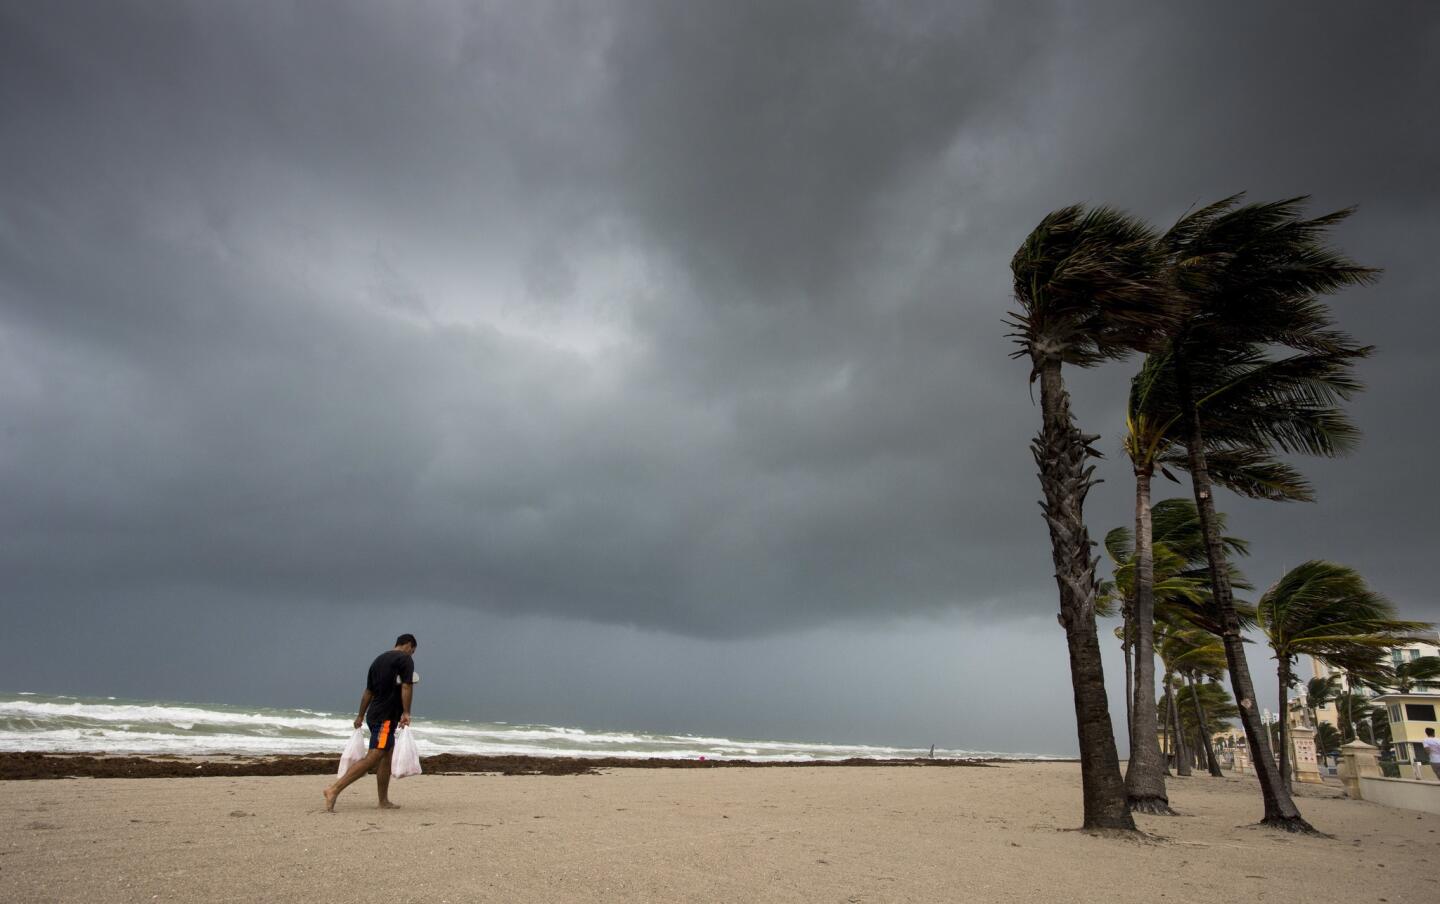 A man walks along the beach with heavy winds and threatening skies in Hollywood, Fla., as Hurricane Irma approaches the state on Sept. 9, 2017.